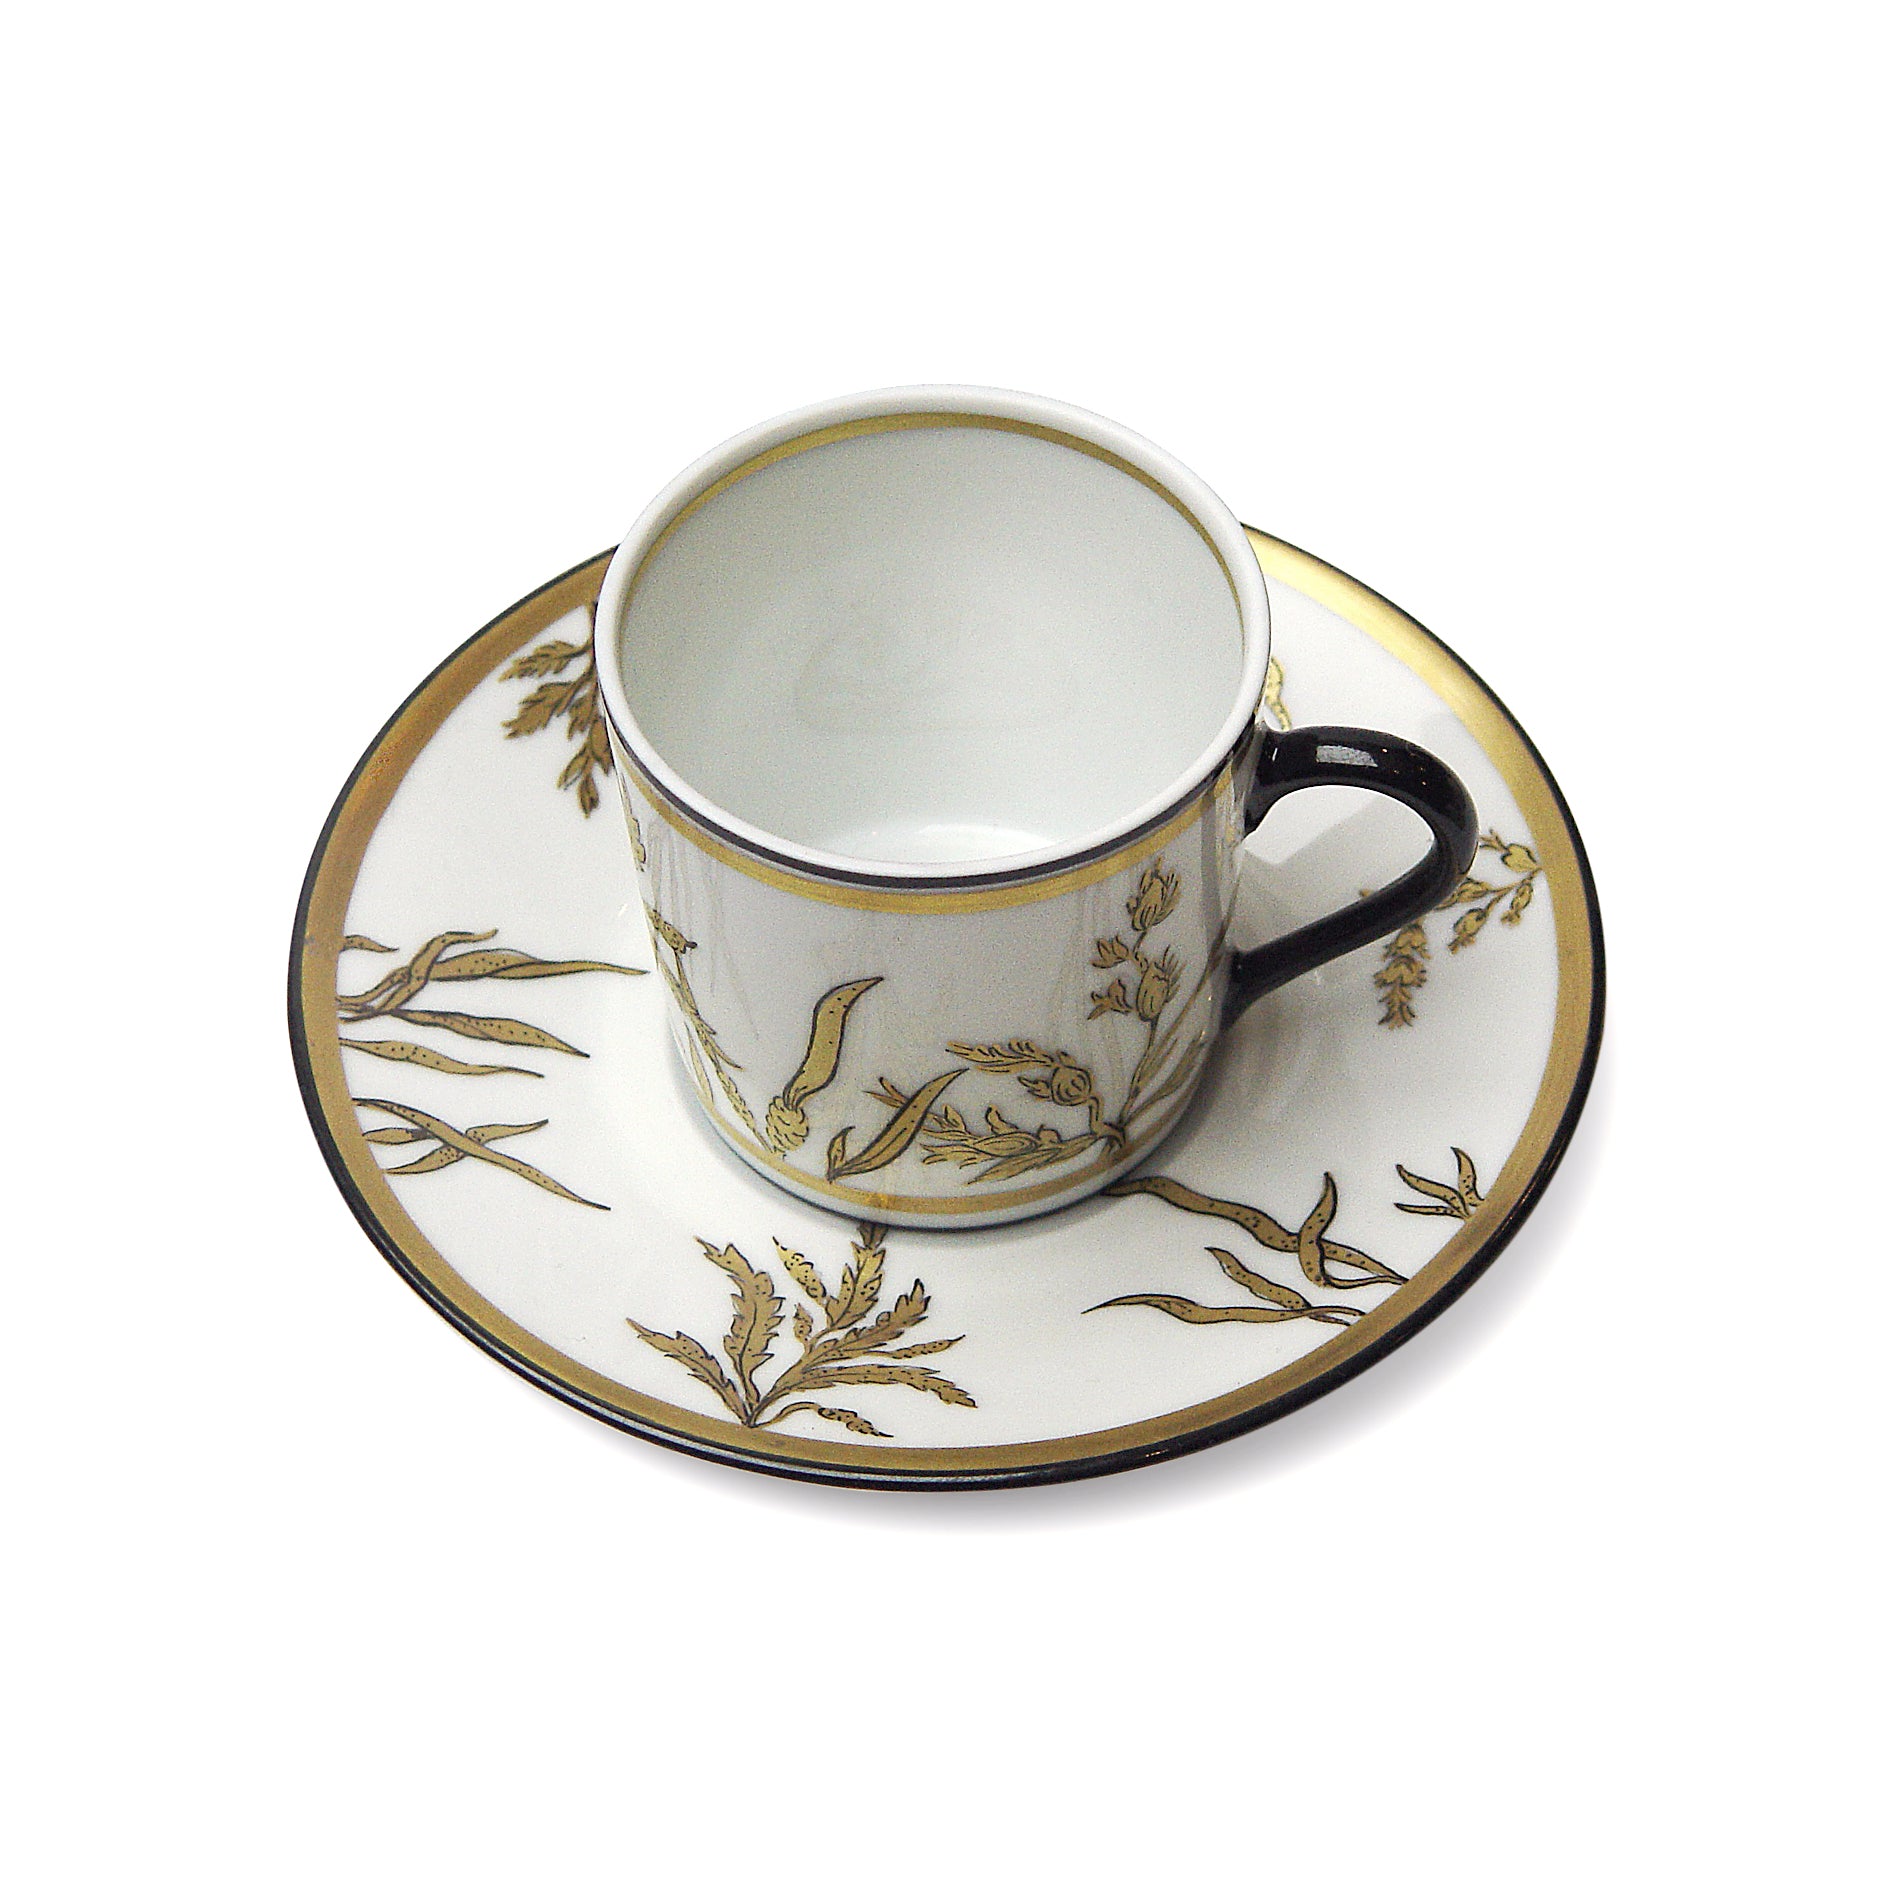 Or des Airs - Or des Mers - Coffee cup and saucer
